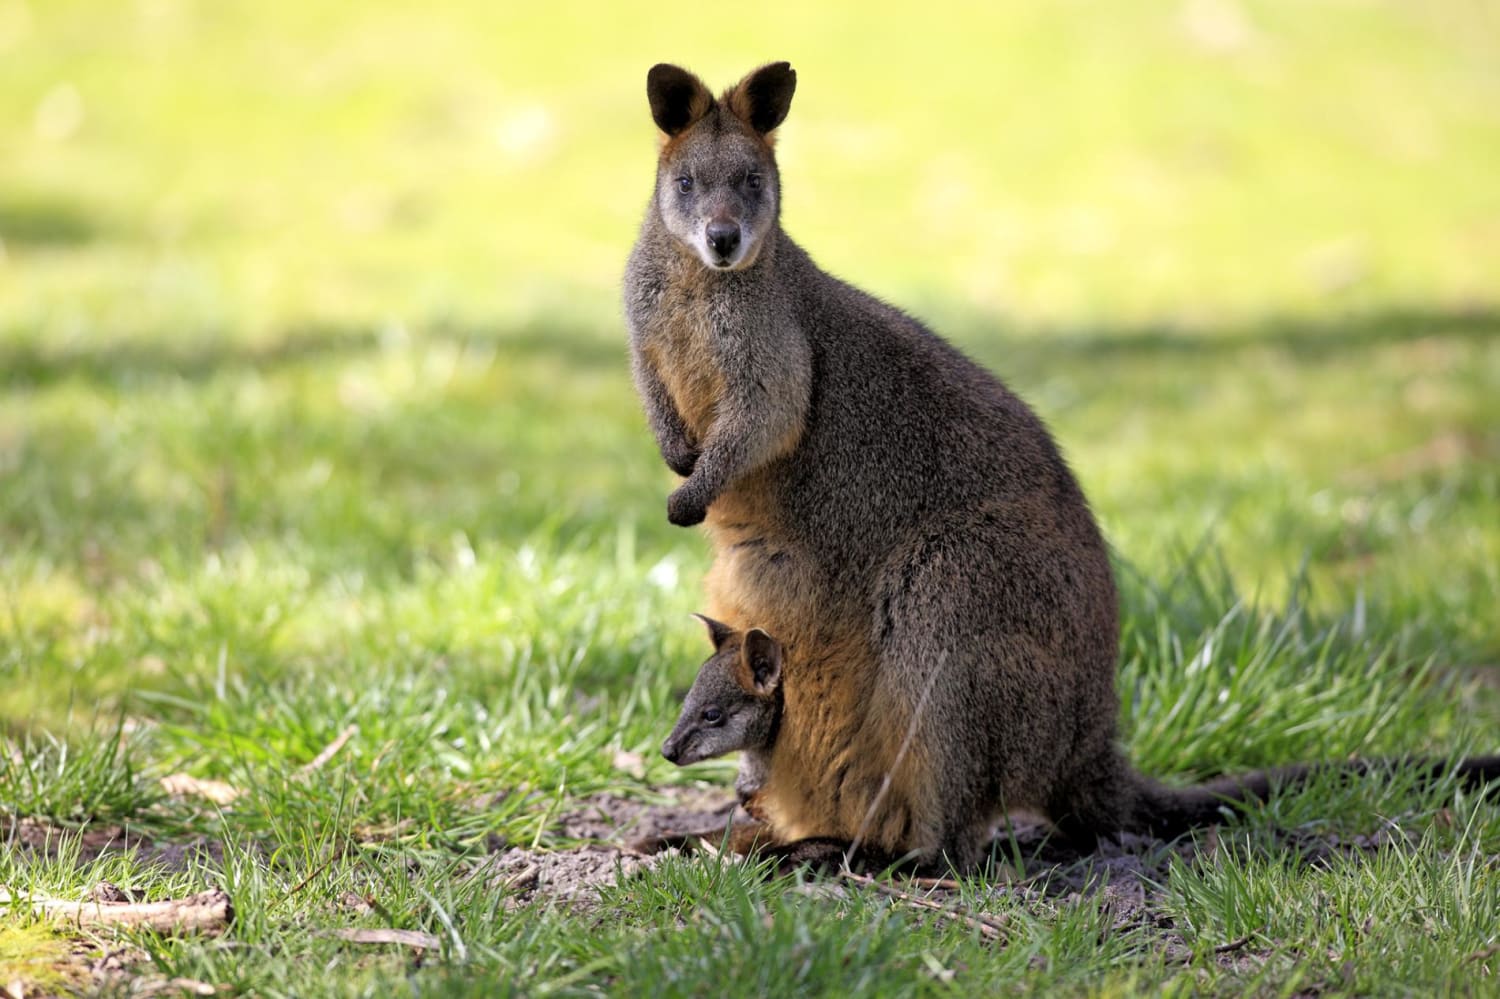 This marsupial is the only animal that's always pregnant